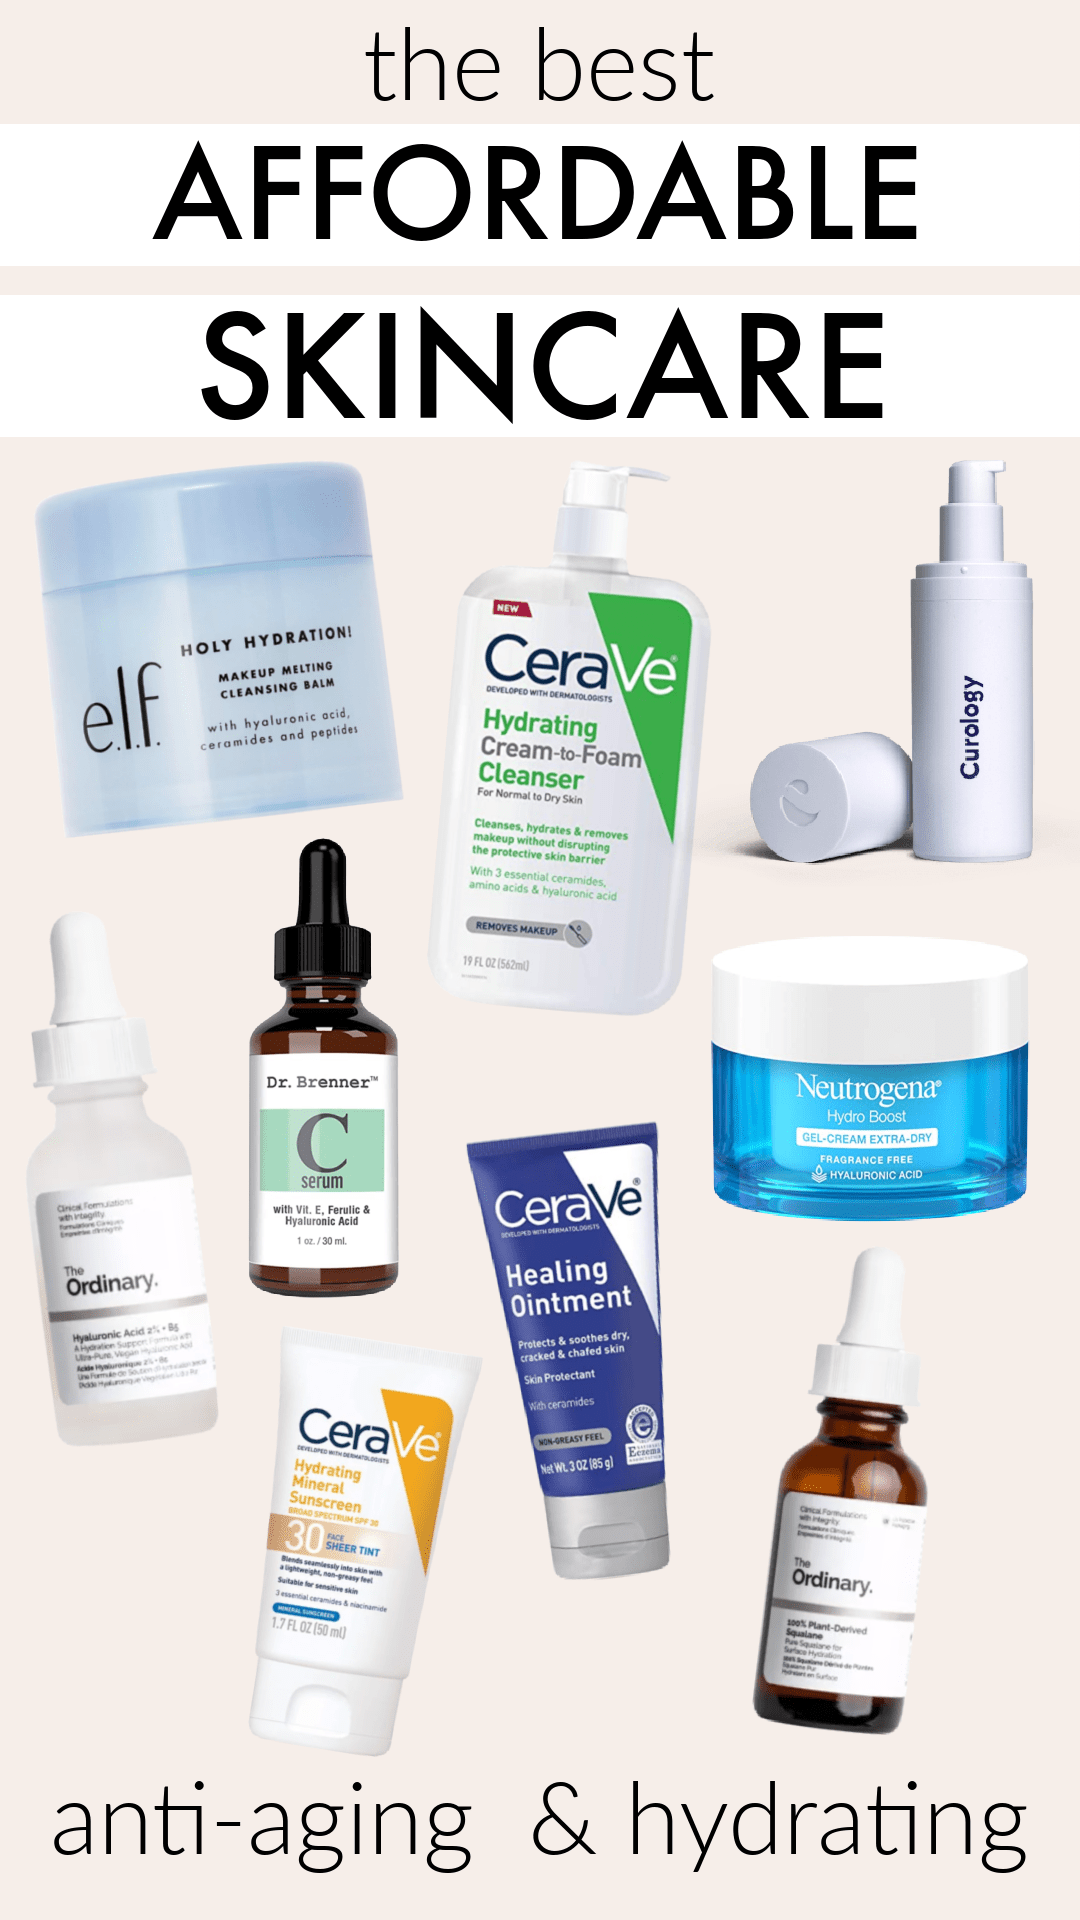 the best affordable skincare - anti-aging and hydrating skincare over 35